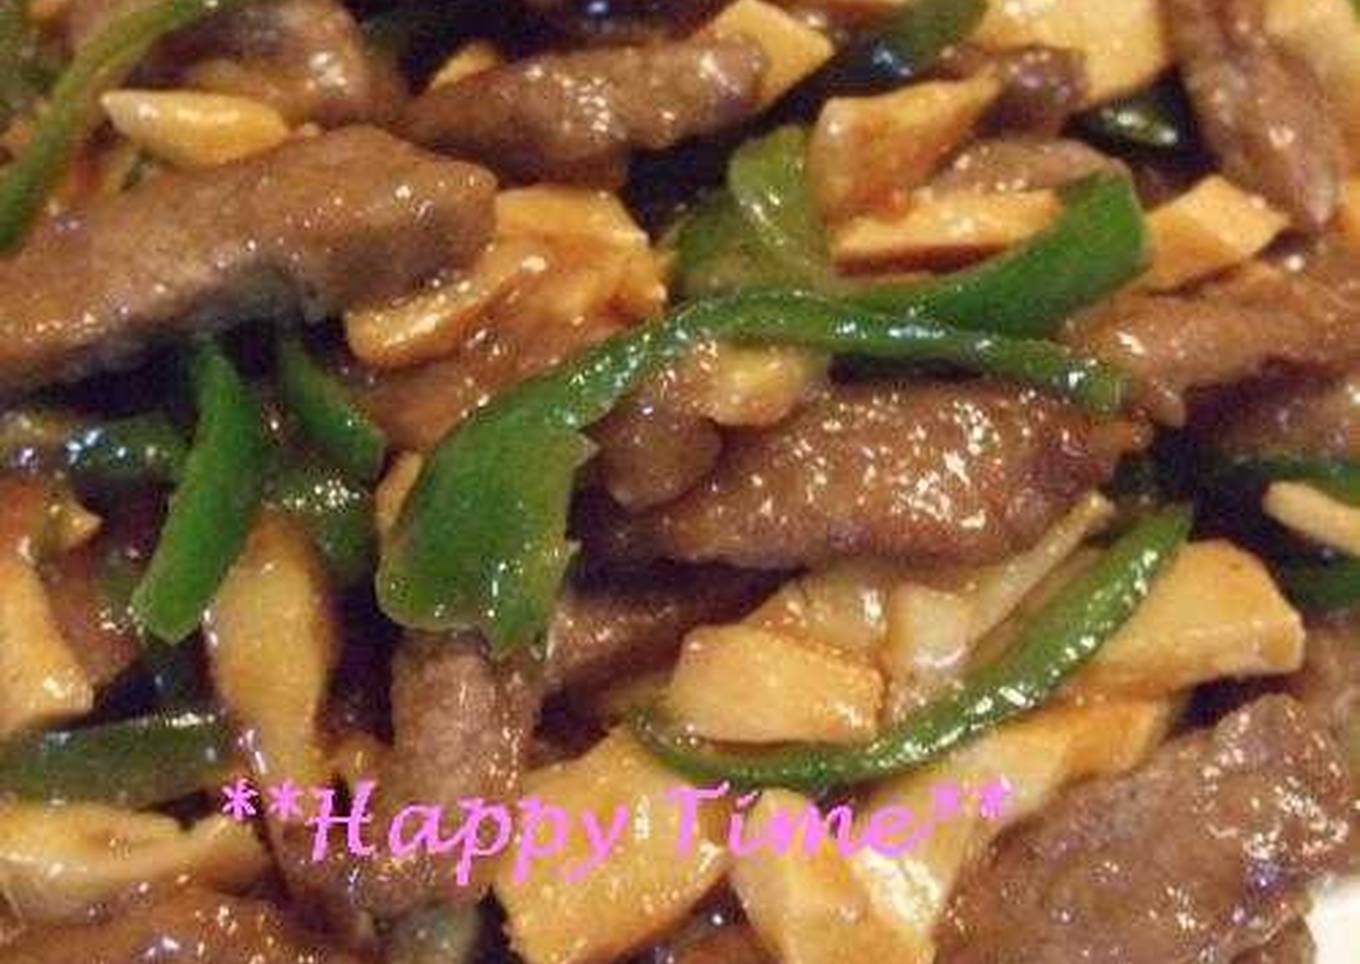 my kids rave about this chinjao rosu stir fried beef and peppers with oyster sauce